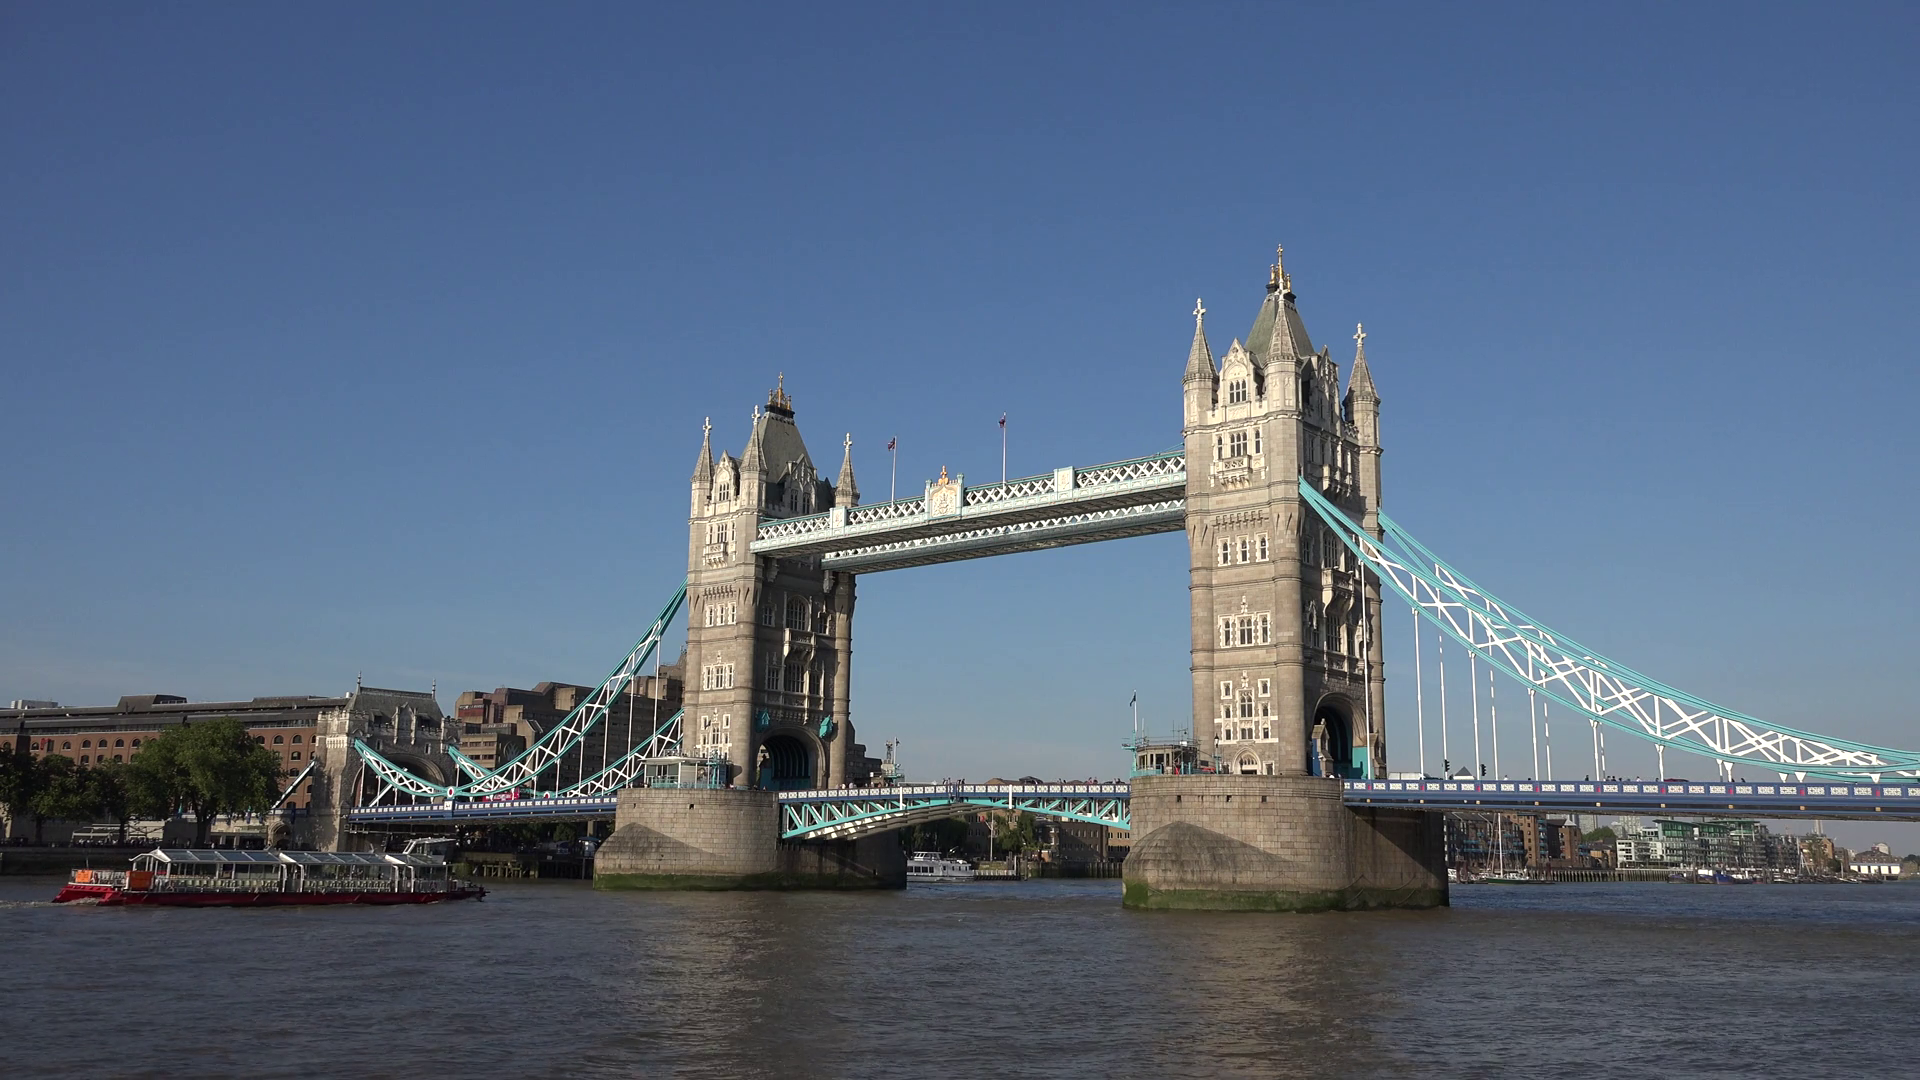 London Tower Bridge in England, Ships, Boats on Thames River, UK ...